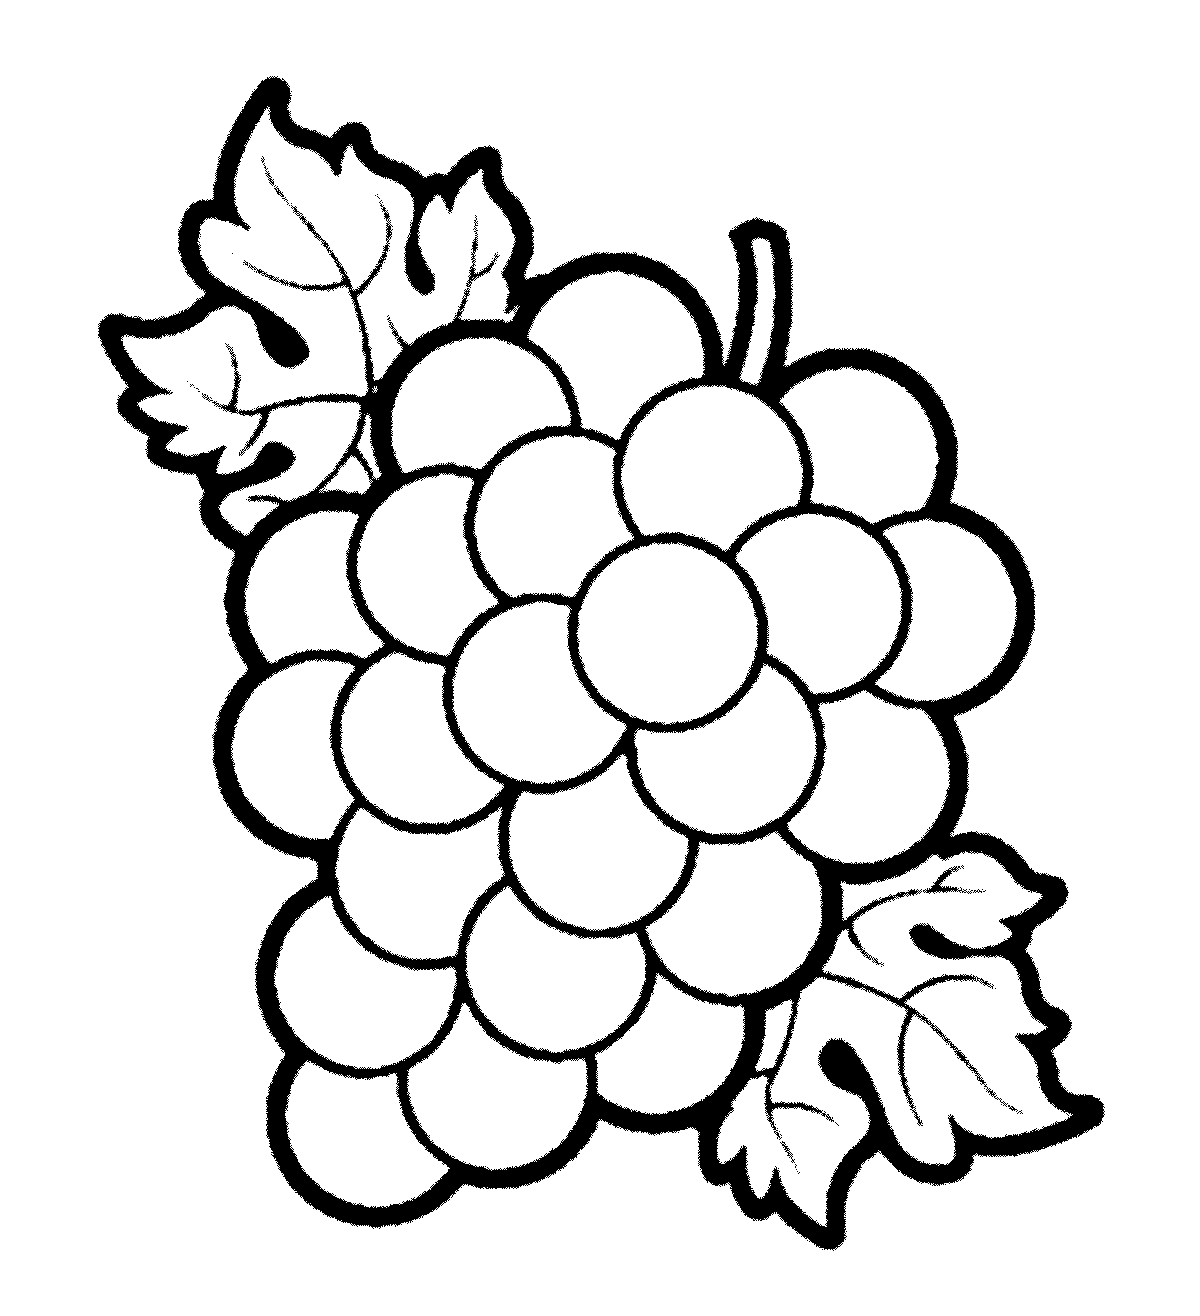 free clipart grapes black and white - photo #48